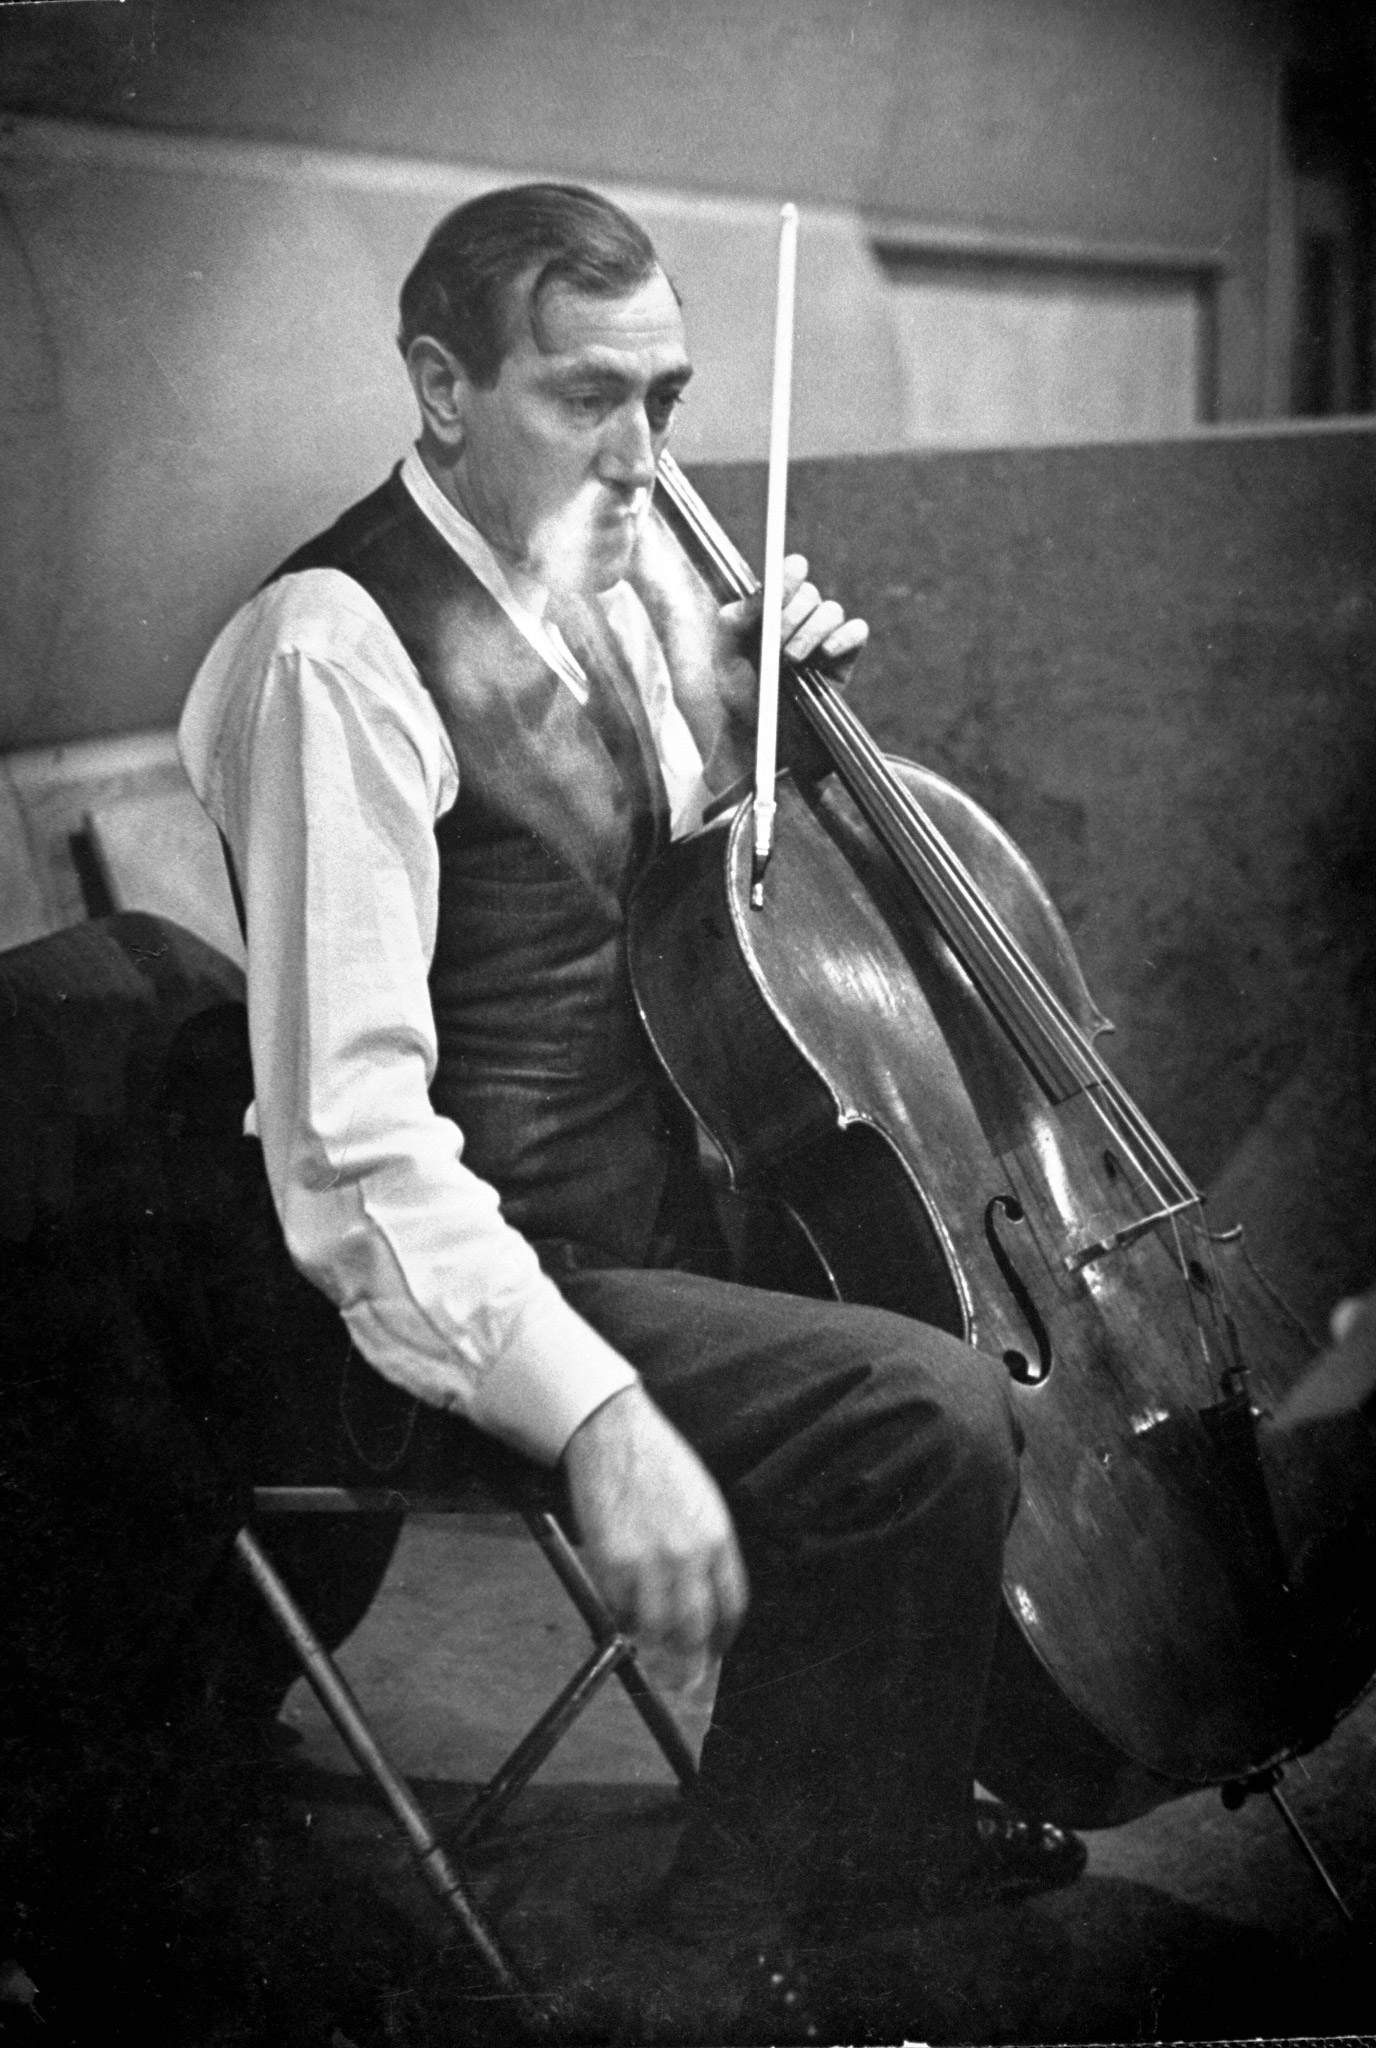 Gregor Piatigorsky unhappily listens to a movement being played back.